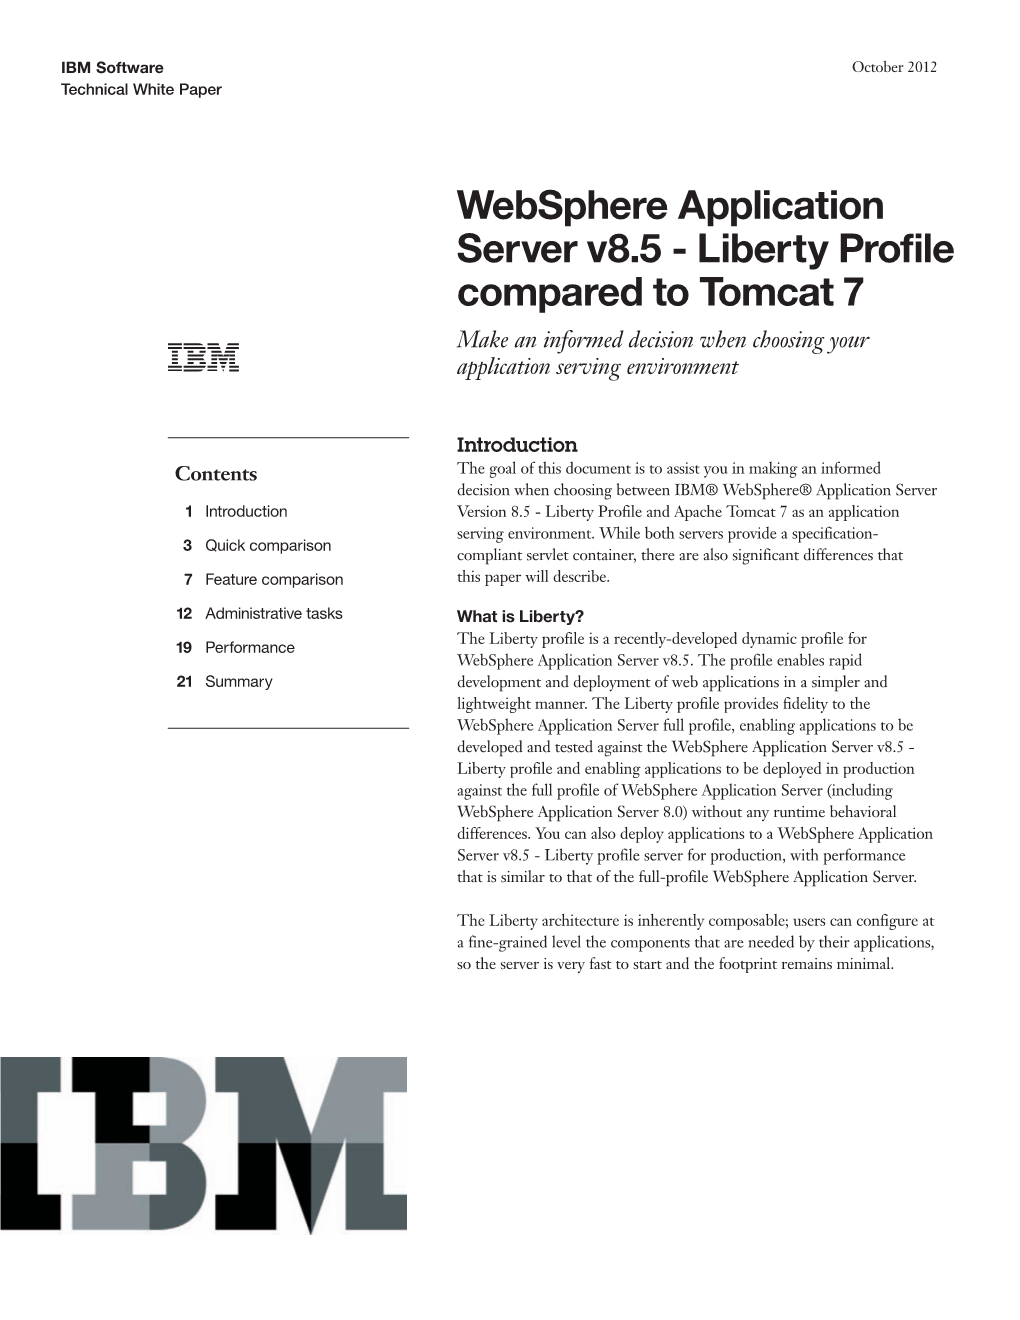 Websphere Application Server V8.5 - Liberty Profile Compared to Tomcat 7 Make an Informed Decision When Choosing Your Application Serving Environment